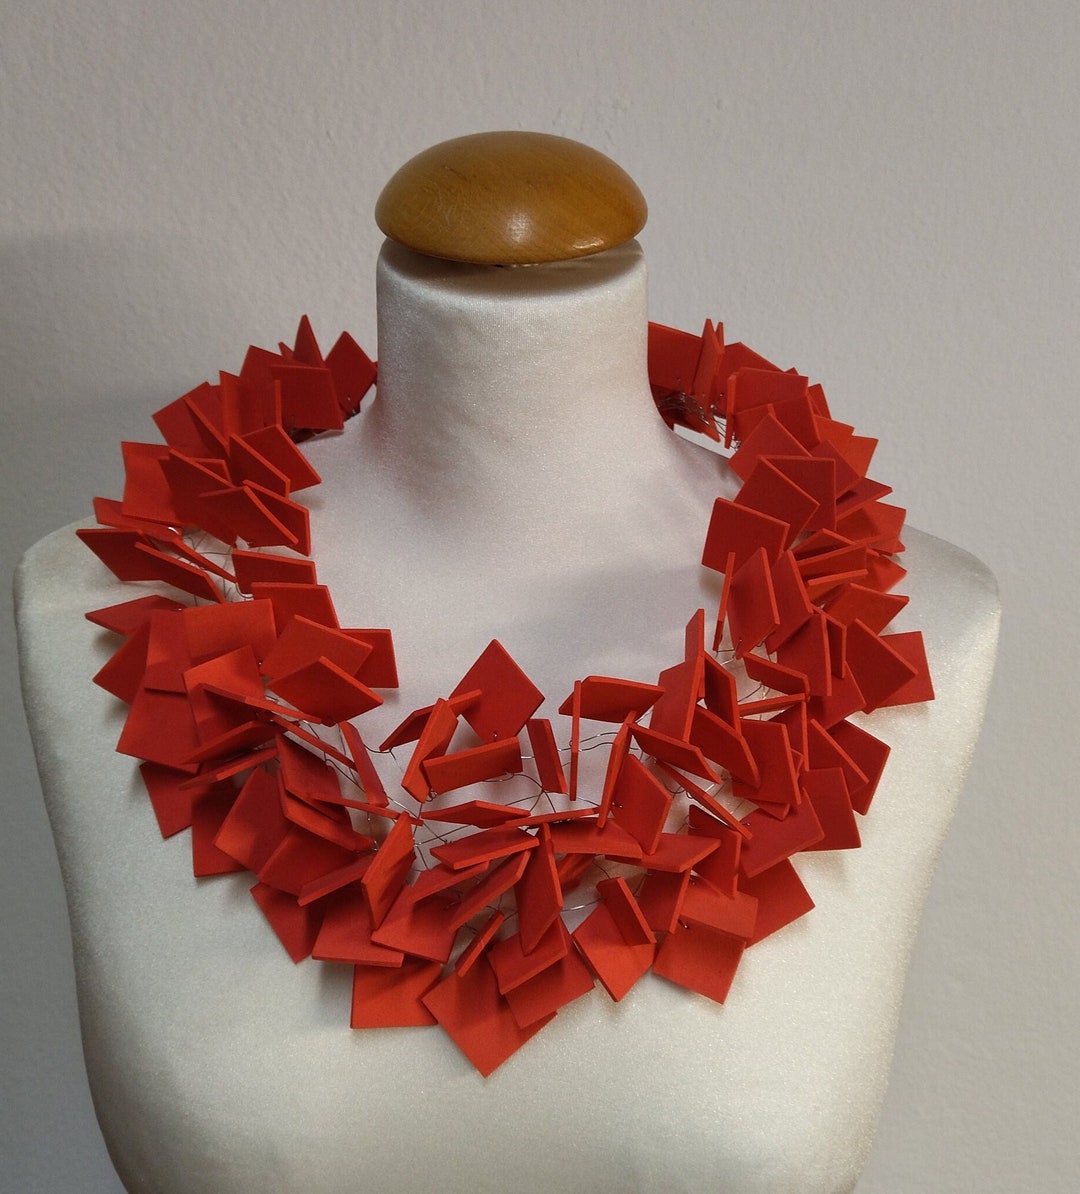 Big Red Necklace for Woman Handmade Red Foam Jewelry - Etsy